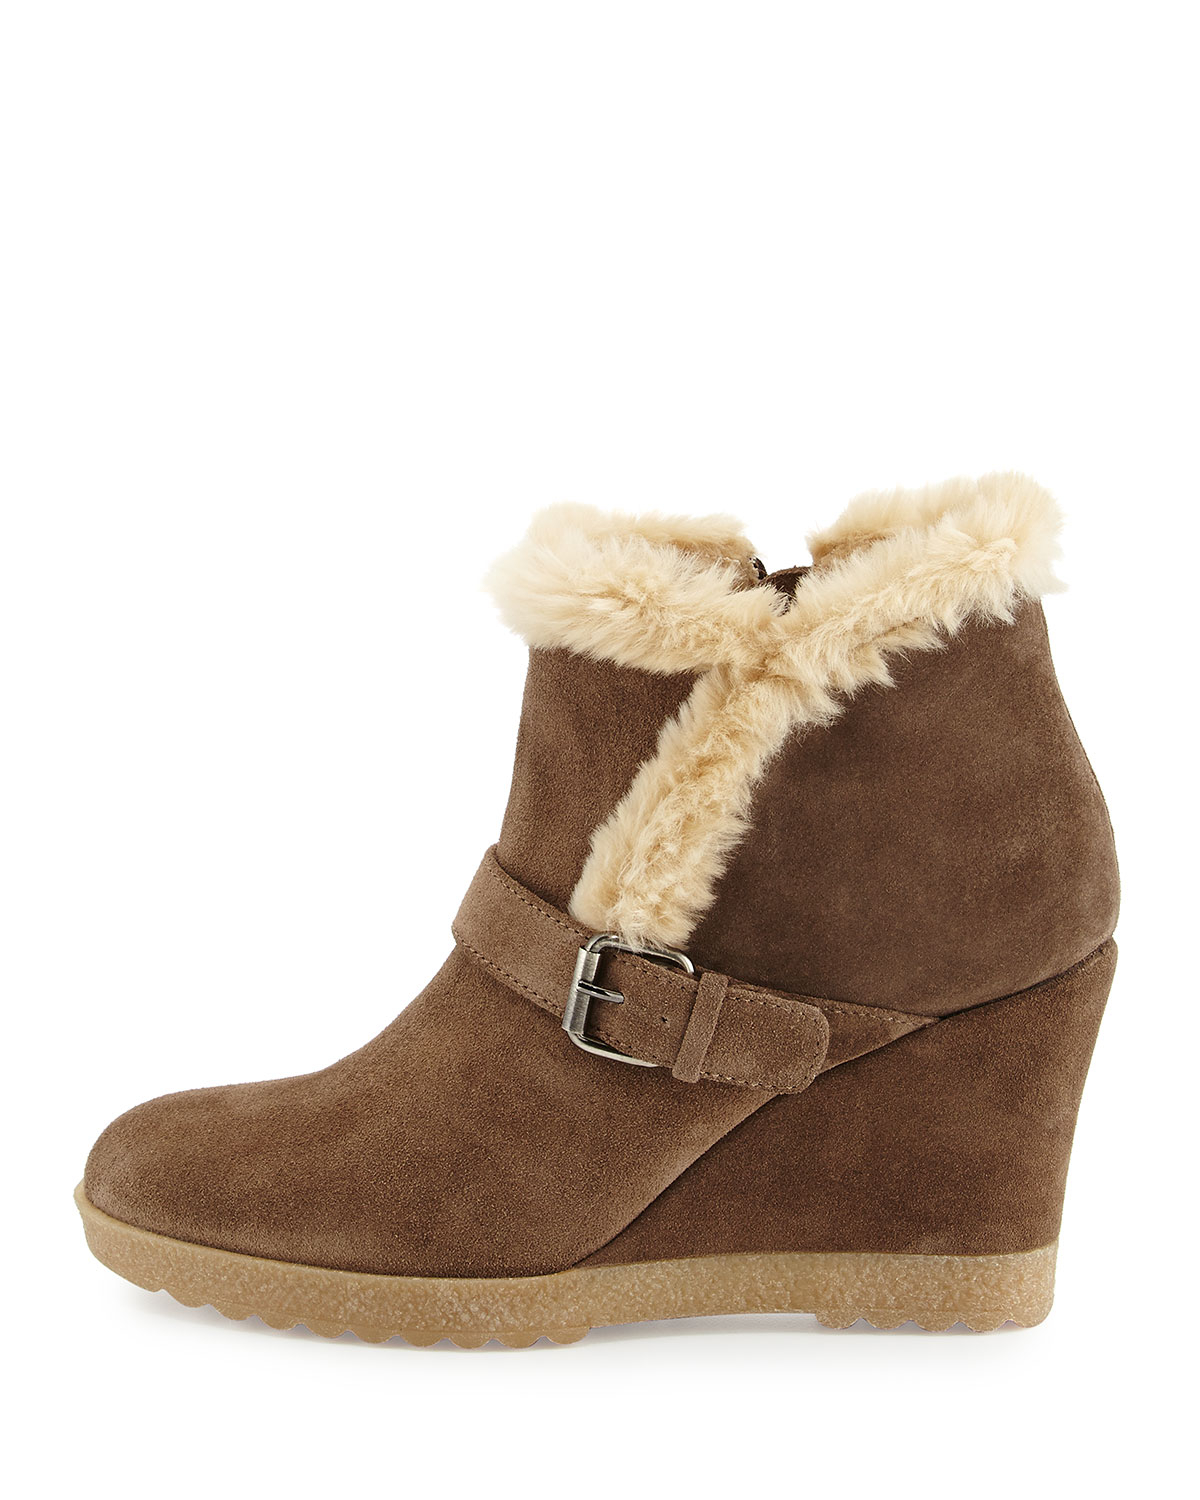 Lyst - Aquatalia Carlotta Faux-Fur Lined Suede Wedge Ankle Boot in Brown